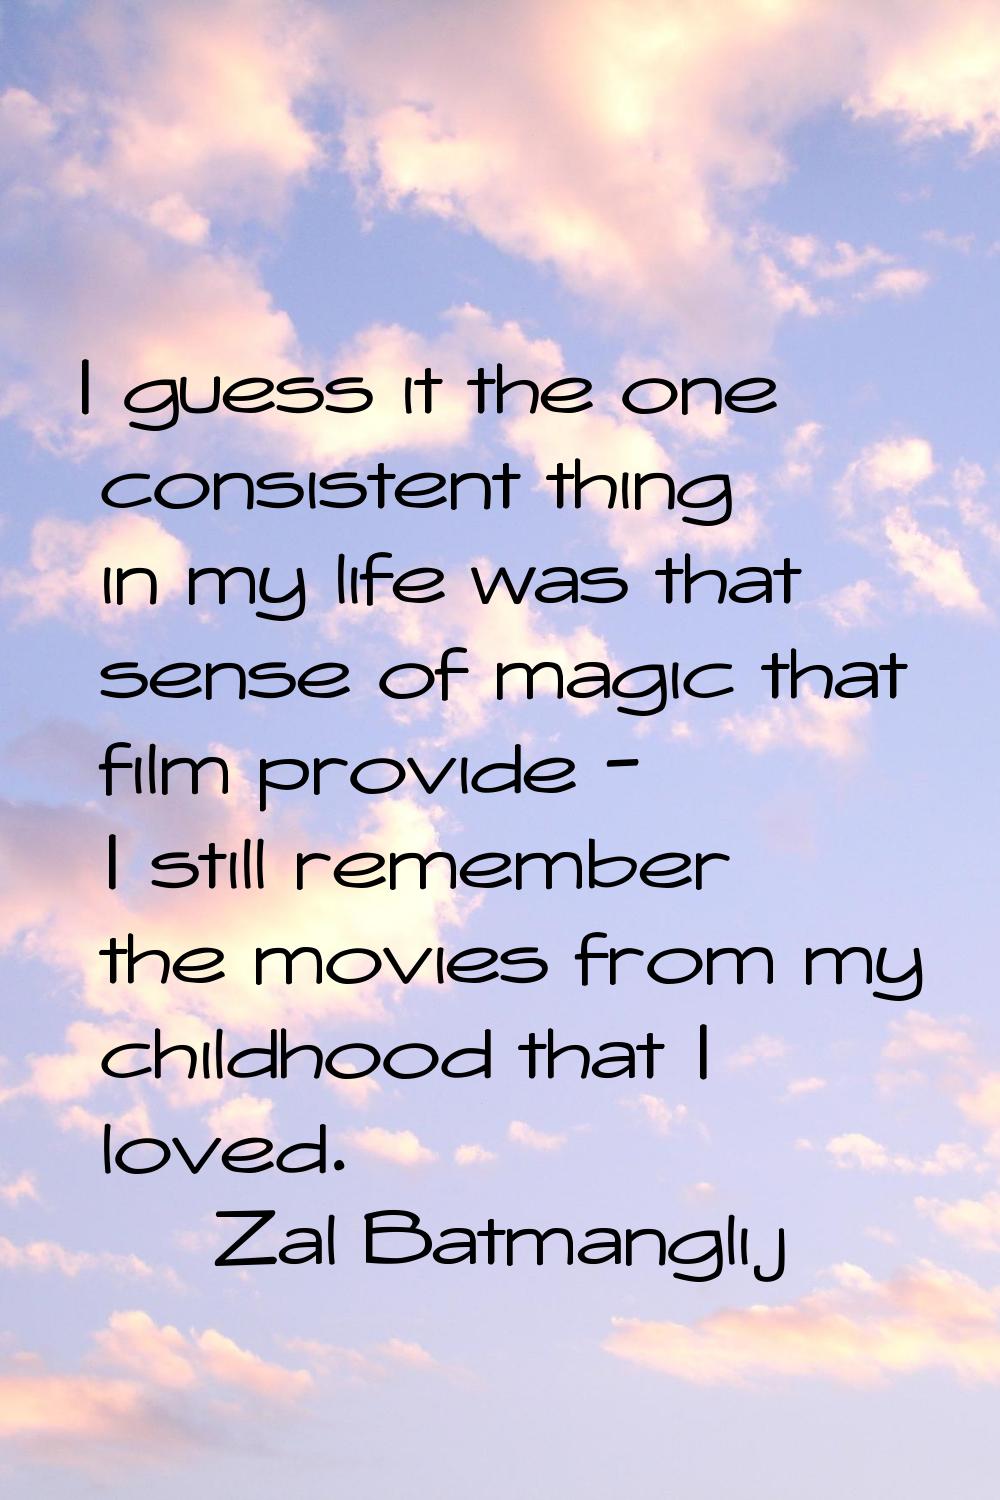 I guess it the one consistent thing in my life was that sense of magic that film provide - I still 